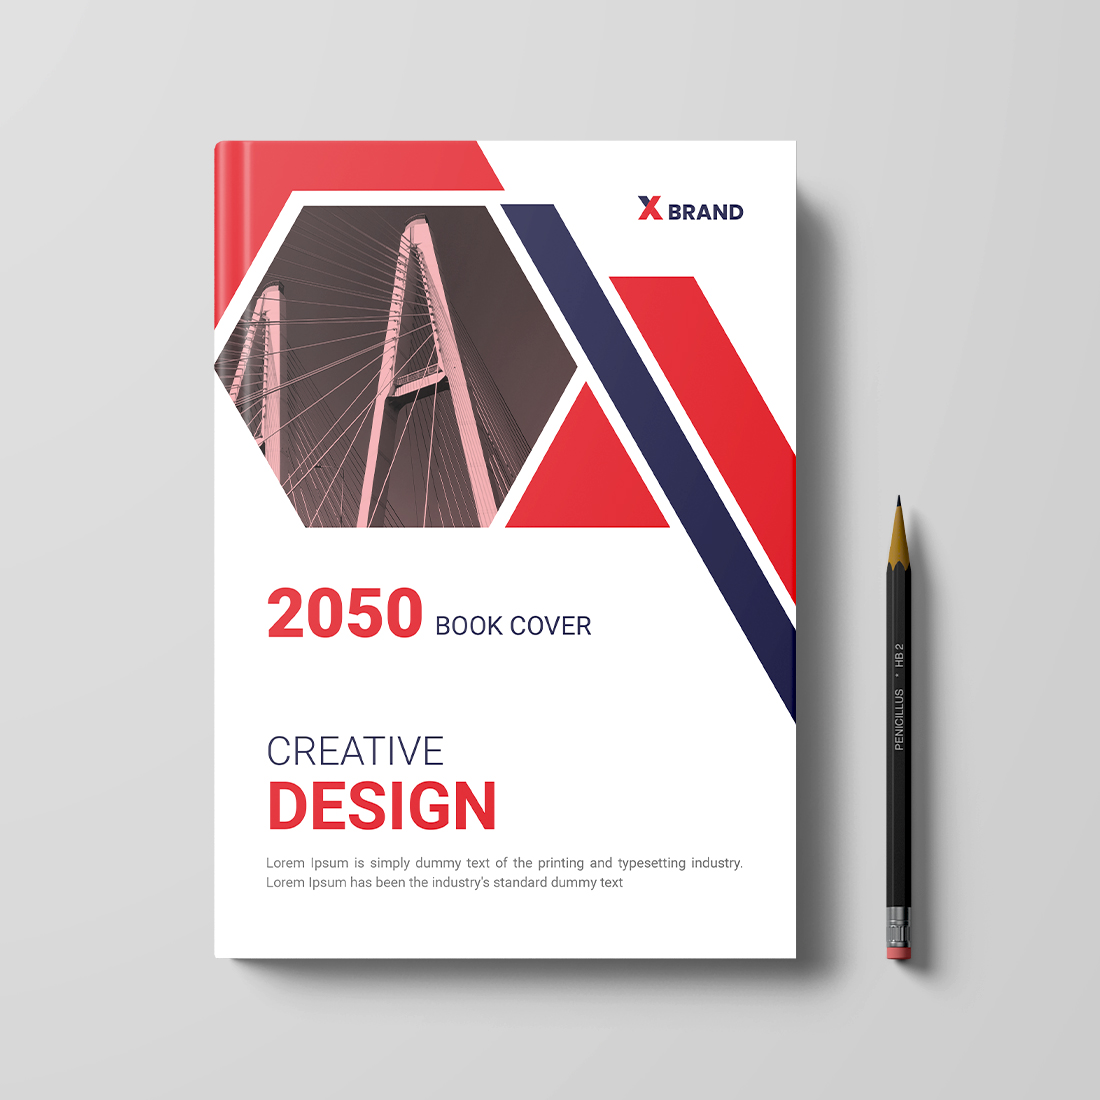 Corporate book cover or brochure cover design template cover image.